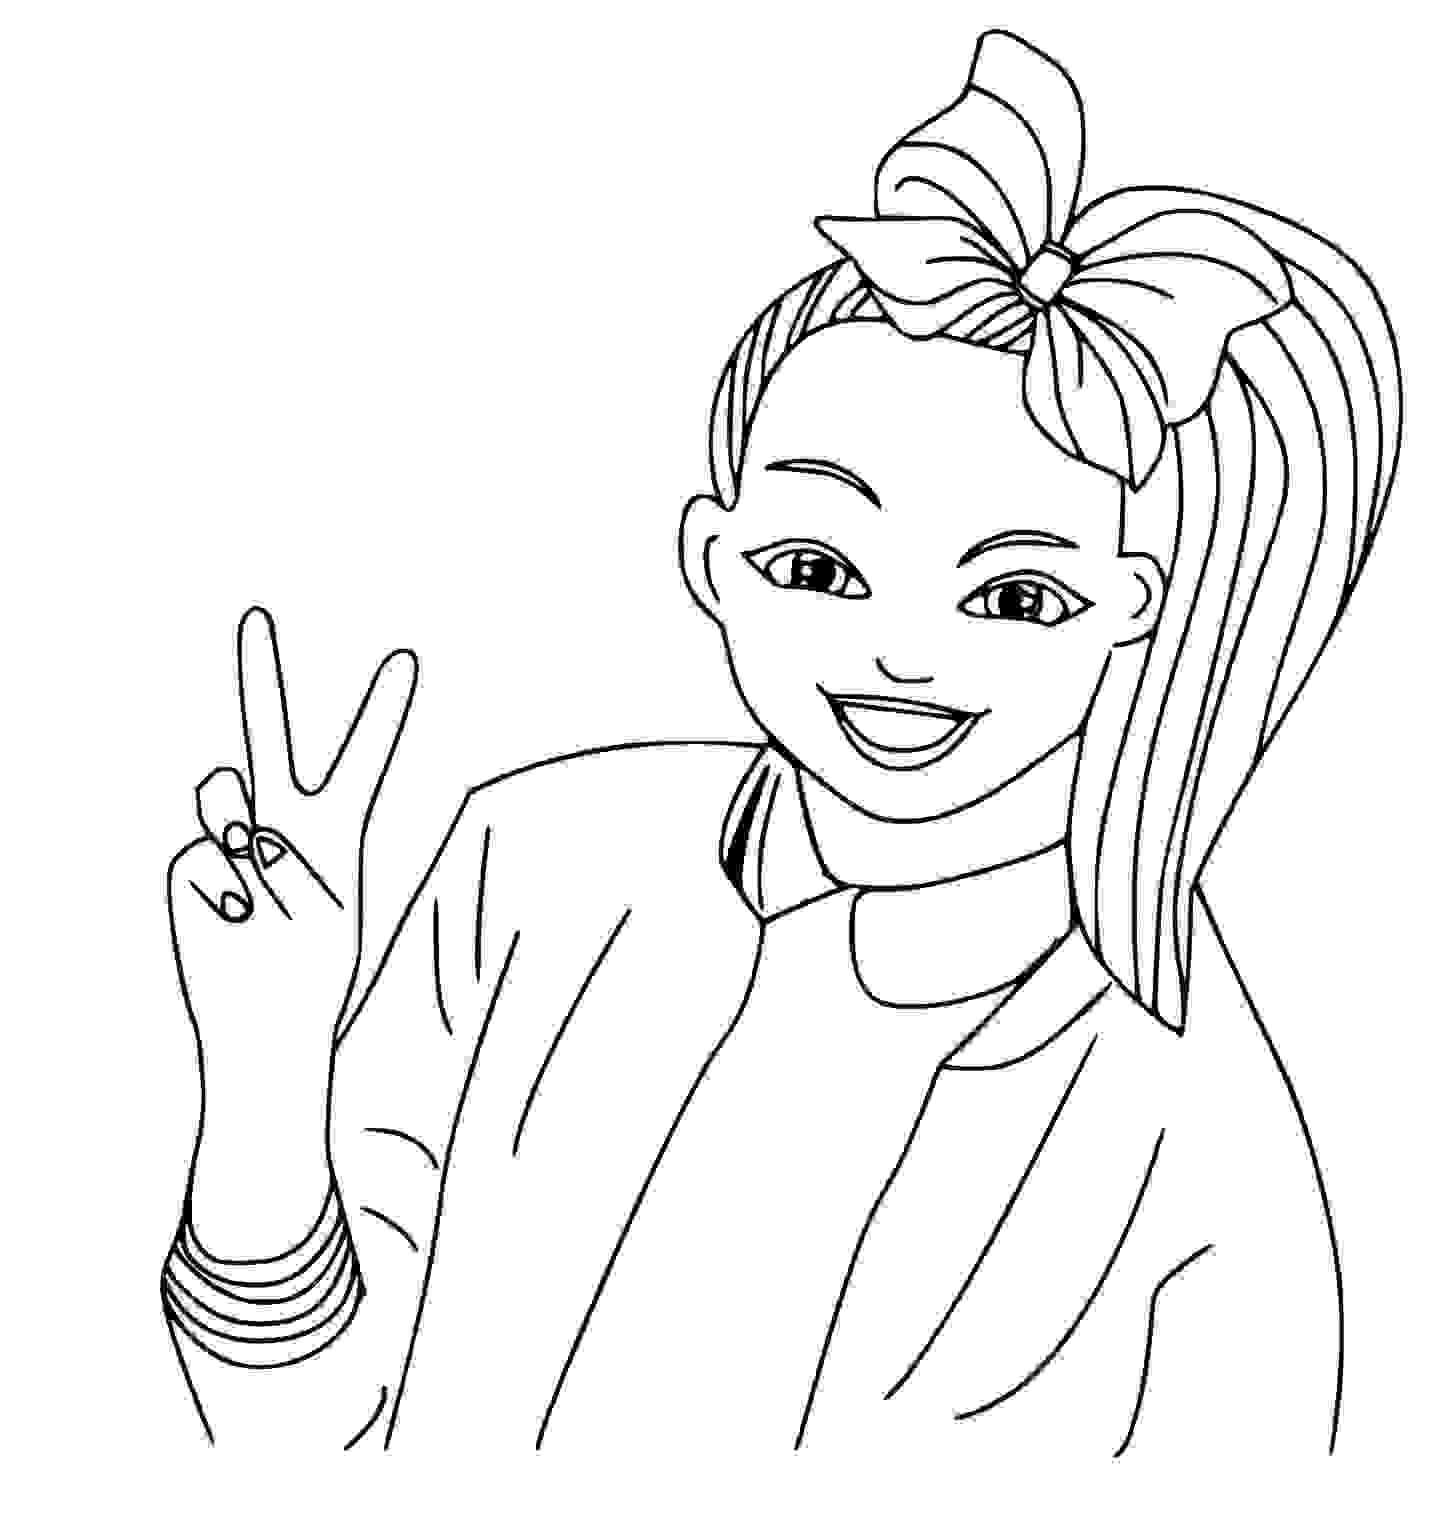 62 Coloring Pages Jojo Siwa  Latest